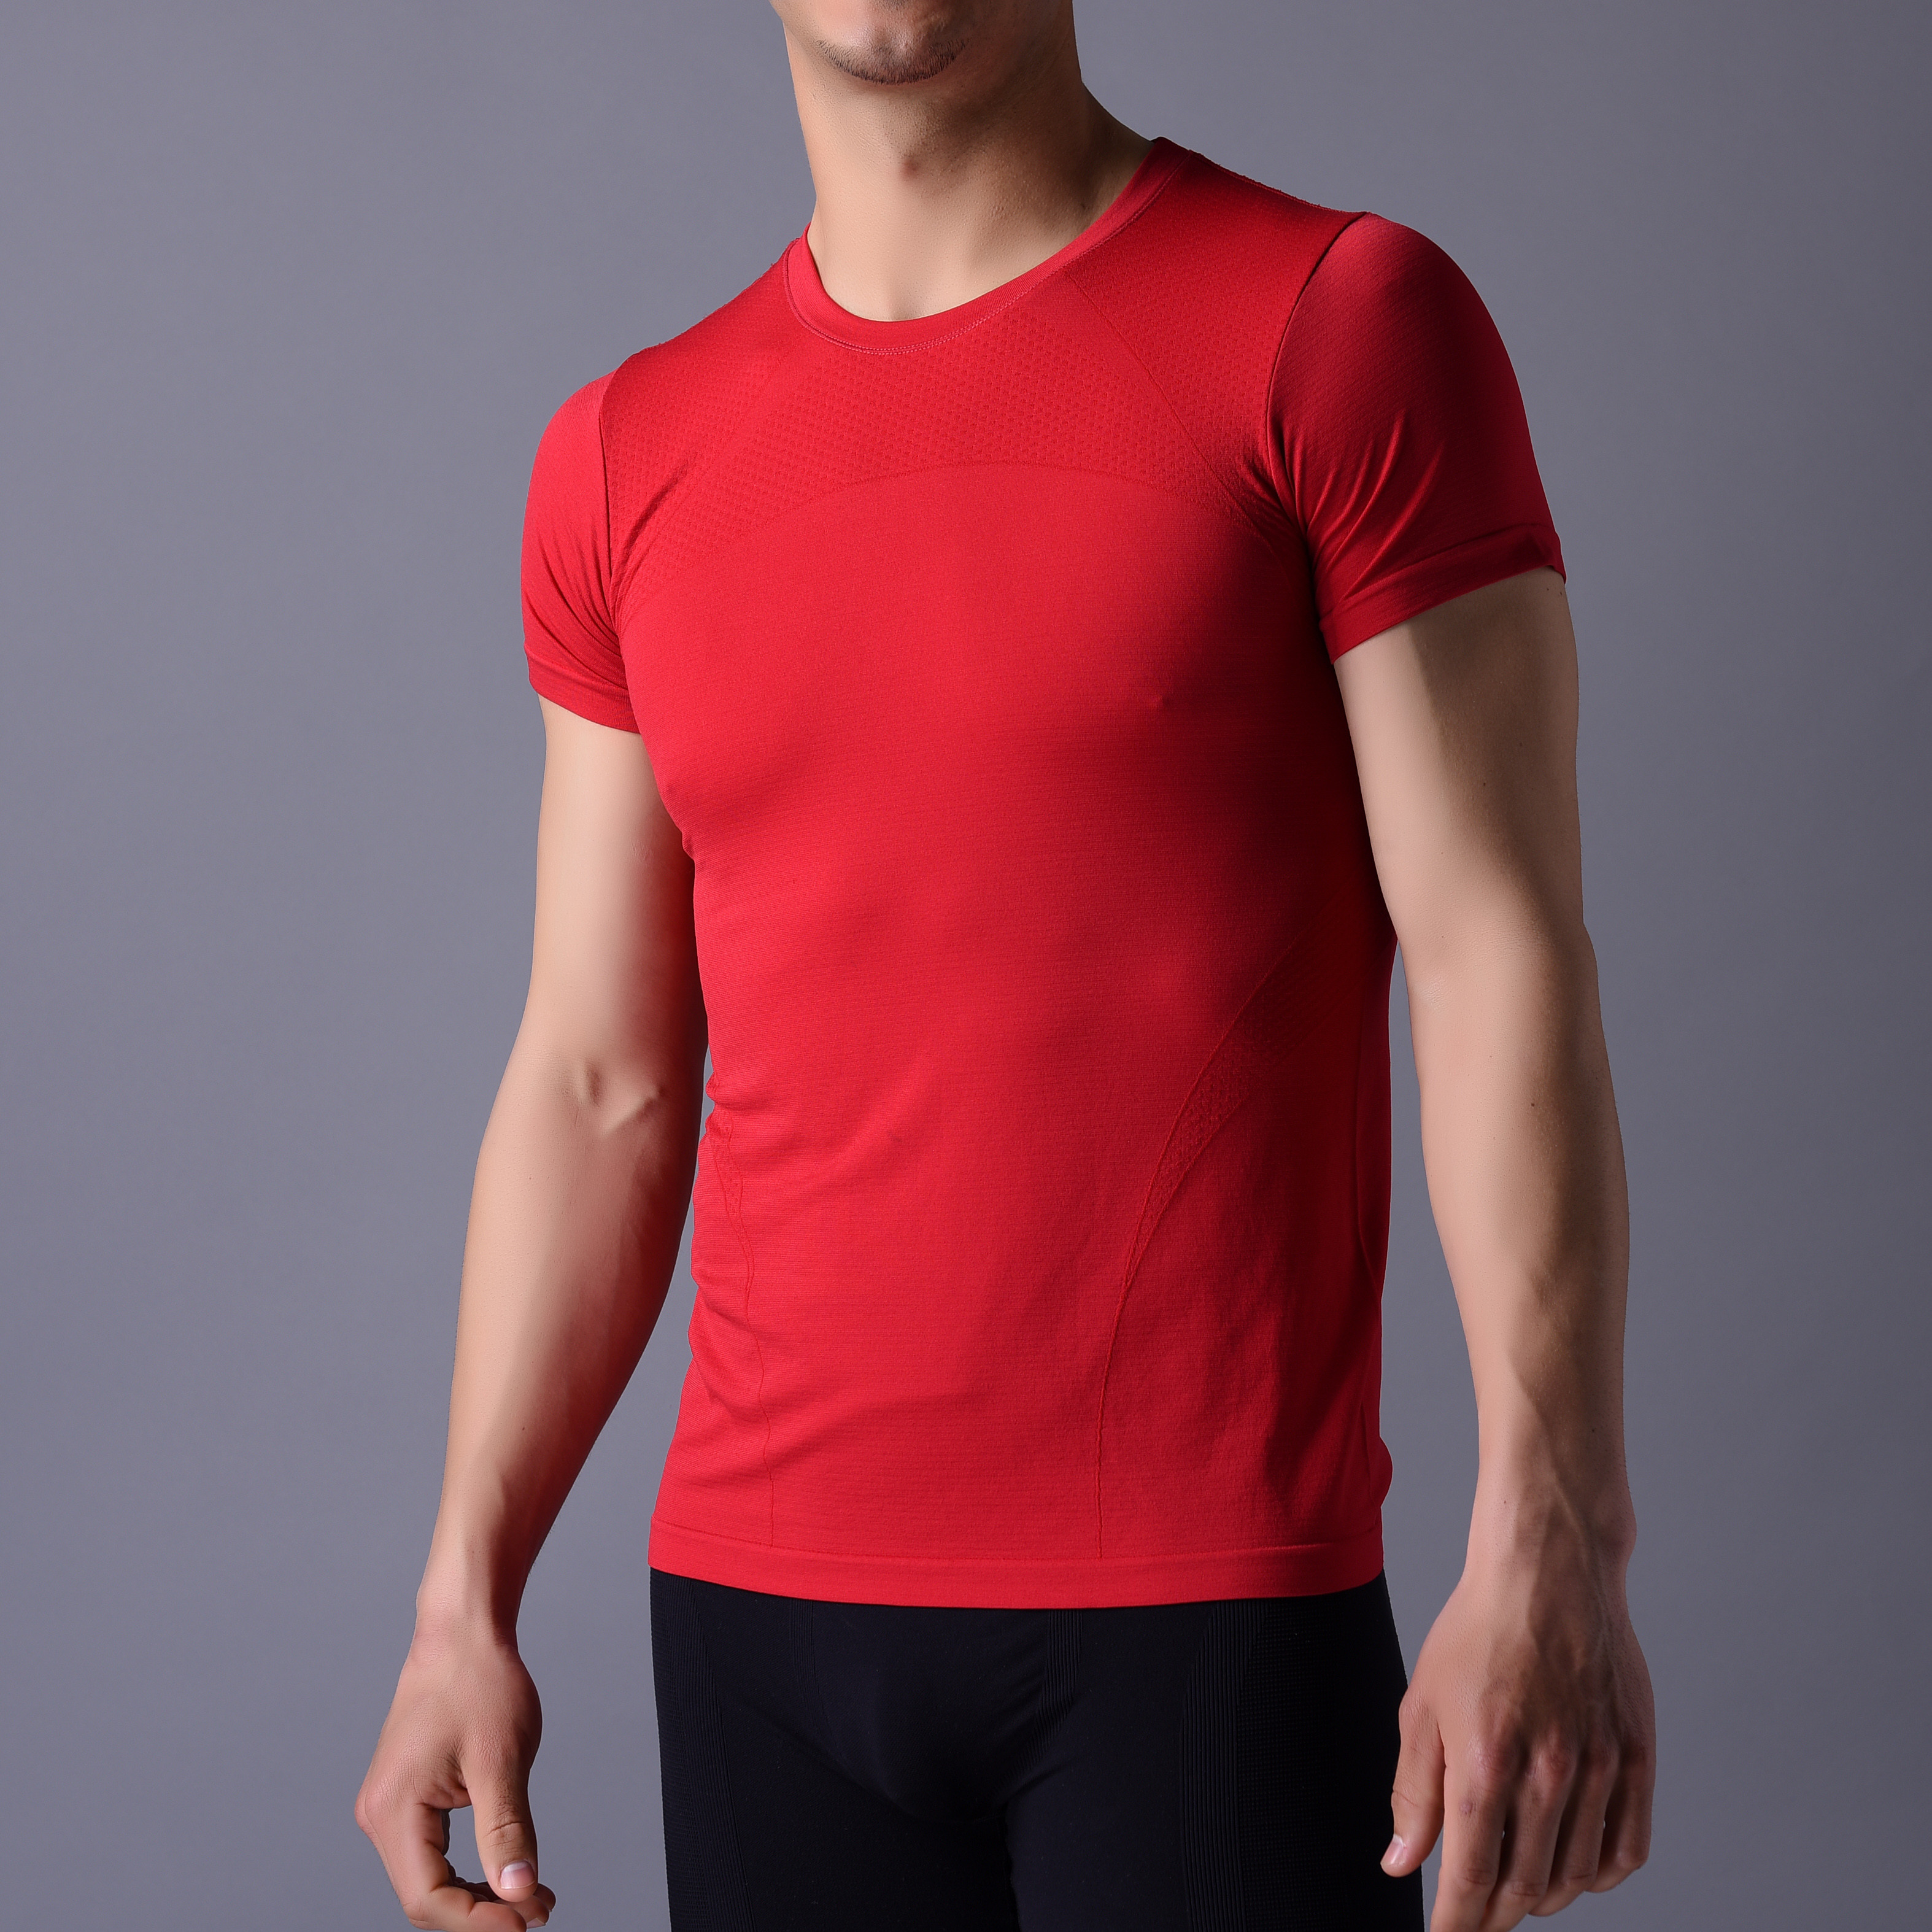 Wholesale Seamless T-shirt, customized  for party, workout,even office.  XLSS005, Red Yoga shirt, from china suppliers